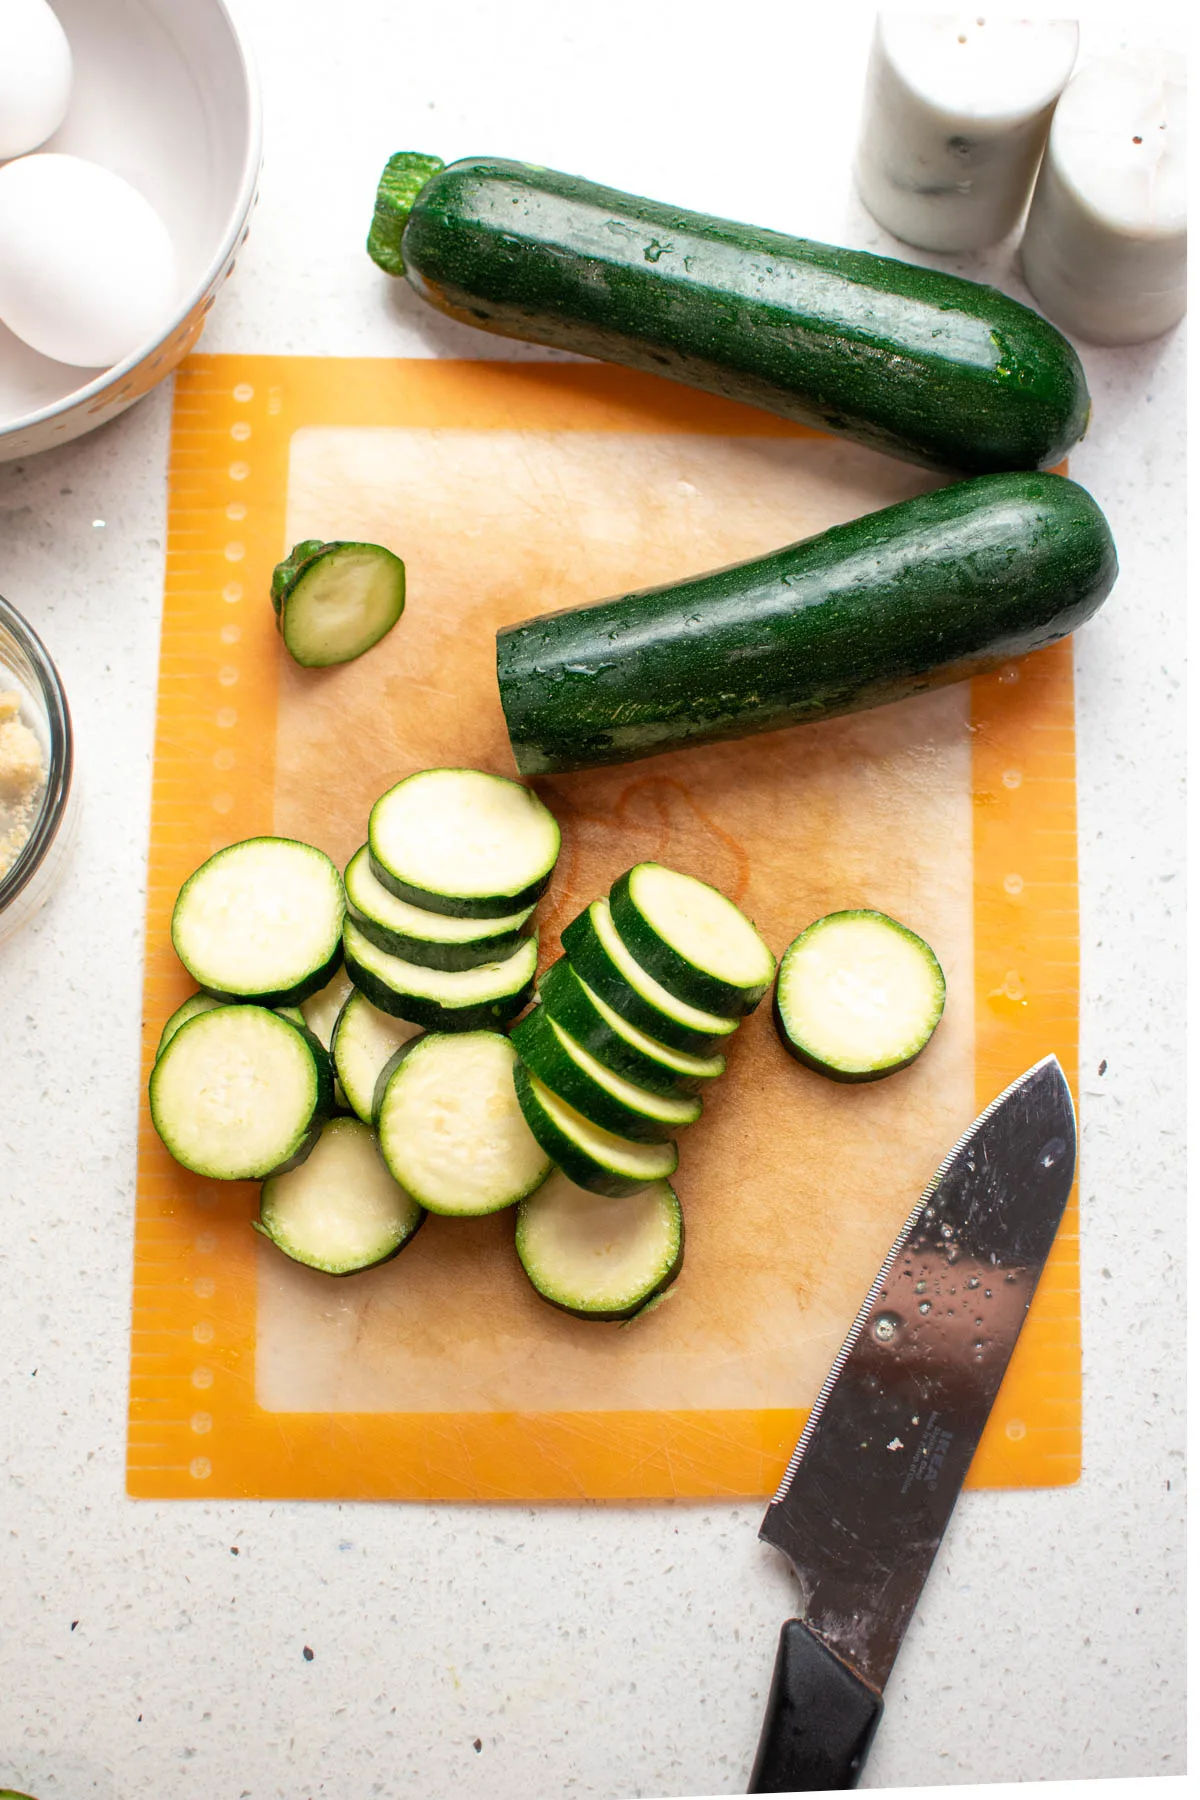 Countertop with partially sliced zucchini and a knife resting on orange cutting board.